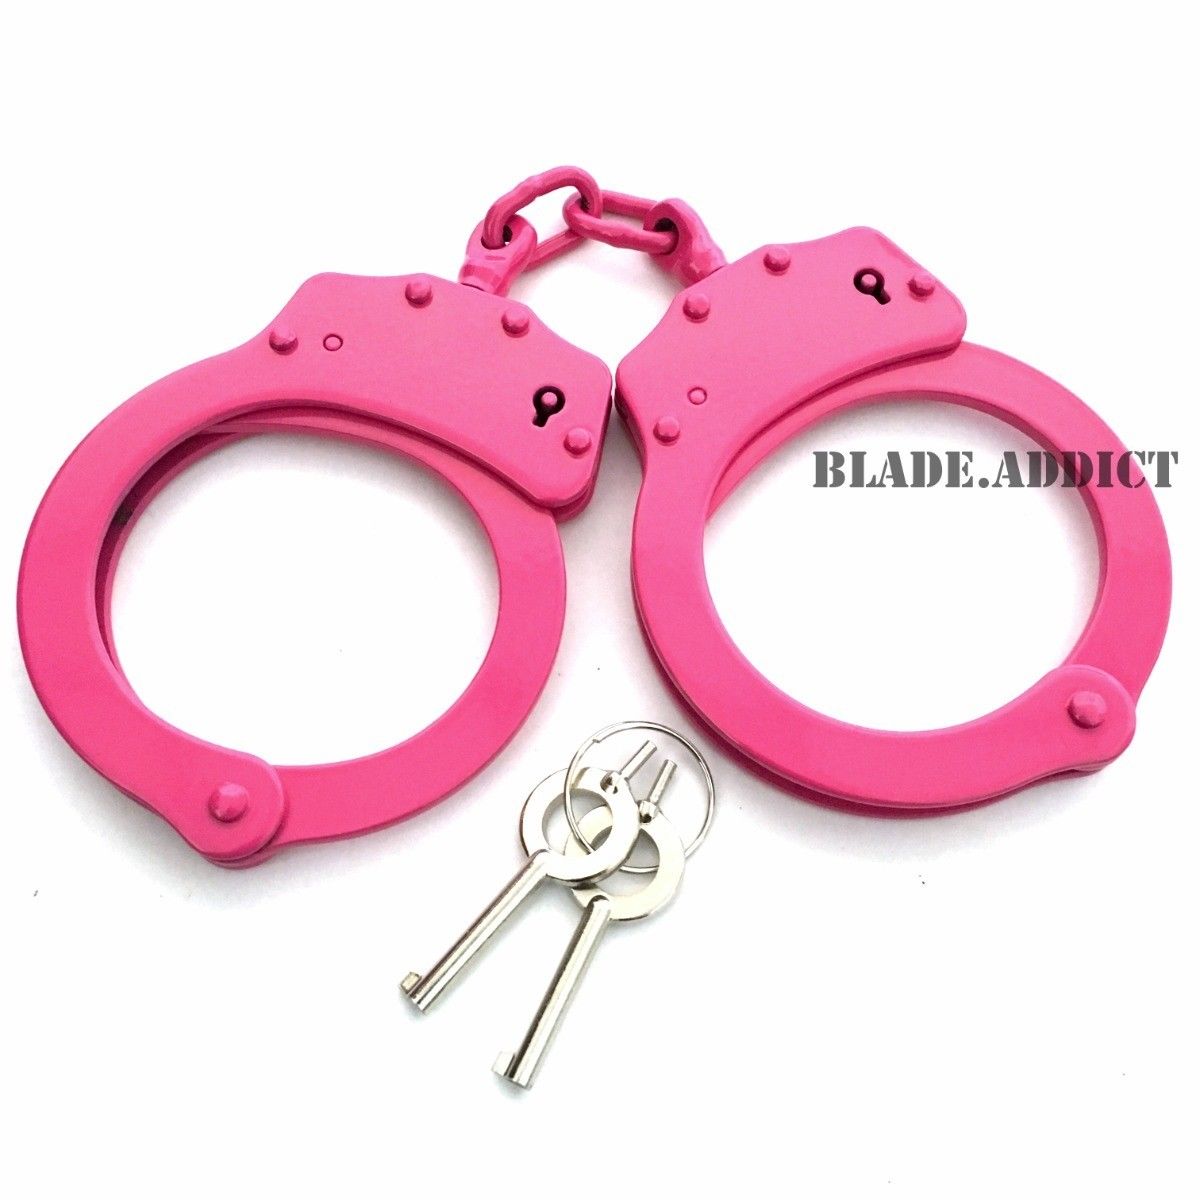 PINK DOUBLE LOCK NICKEL PLATED HEAVY DUTY STAINLESS STEEL HAND CUFFS + KEYS Real